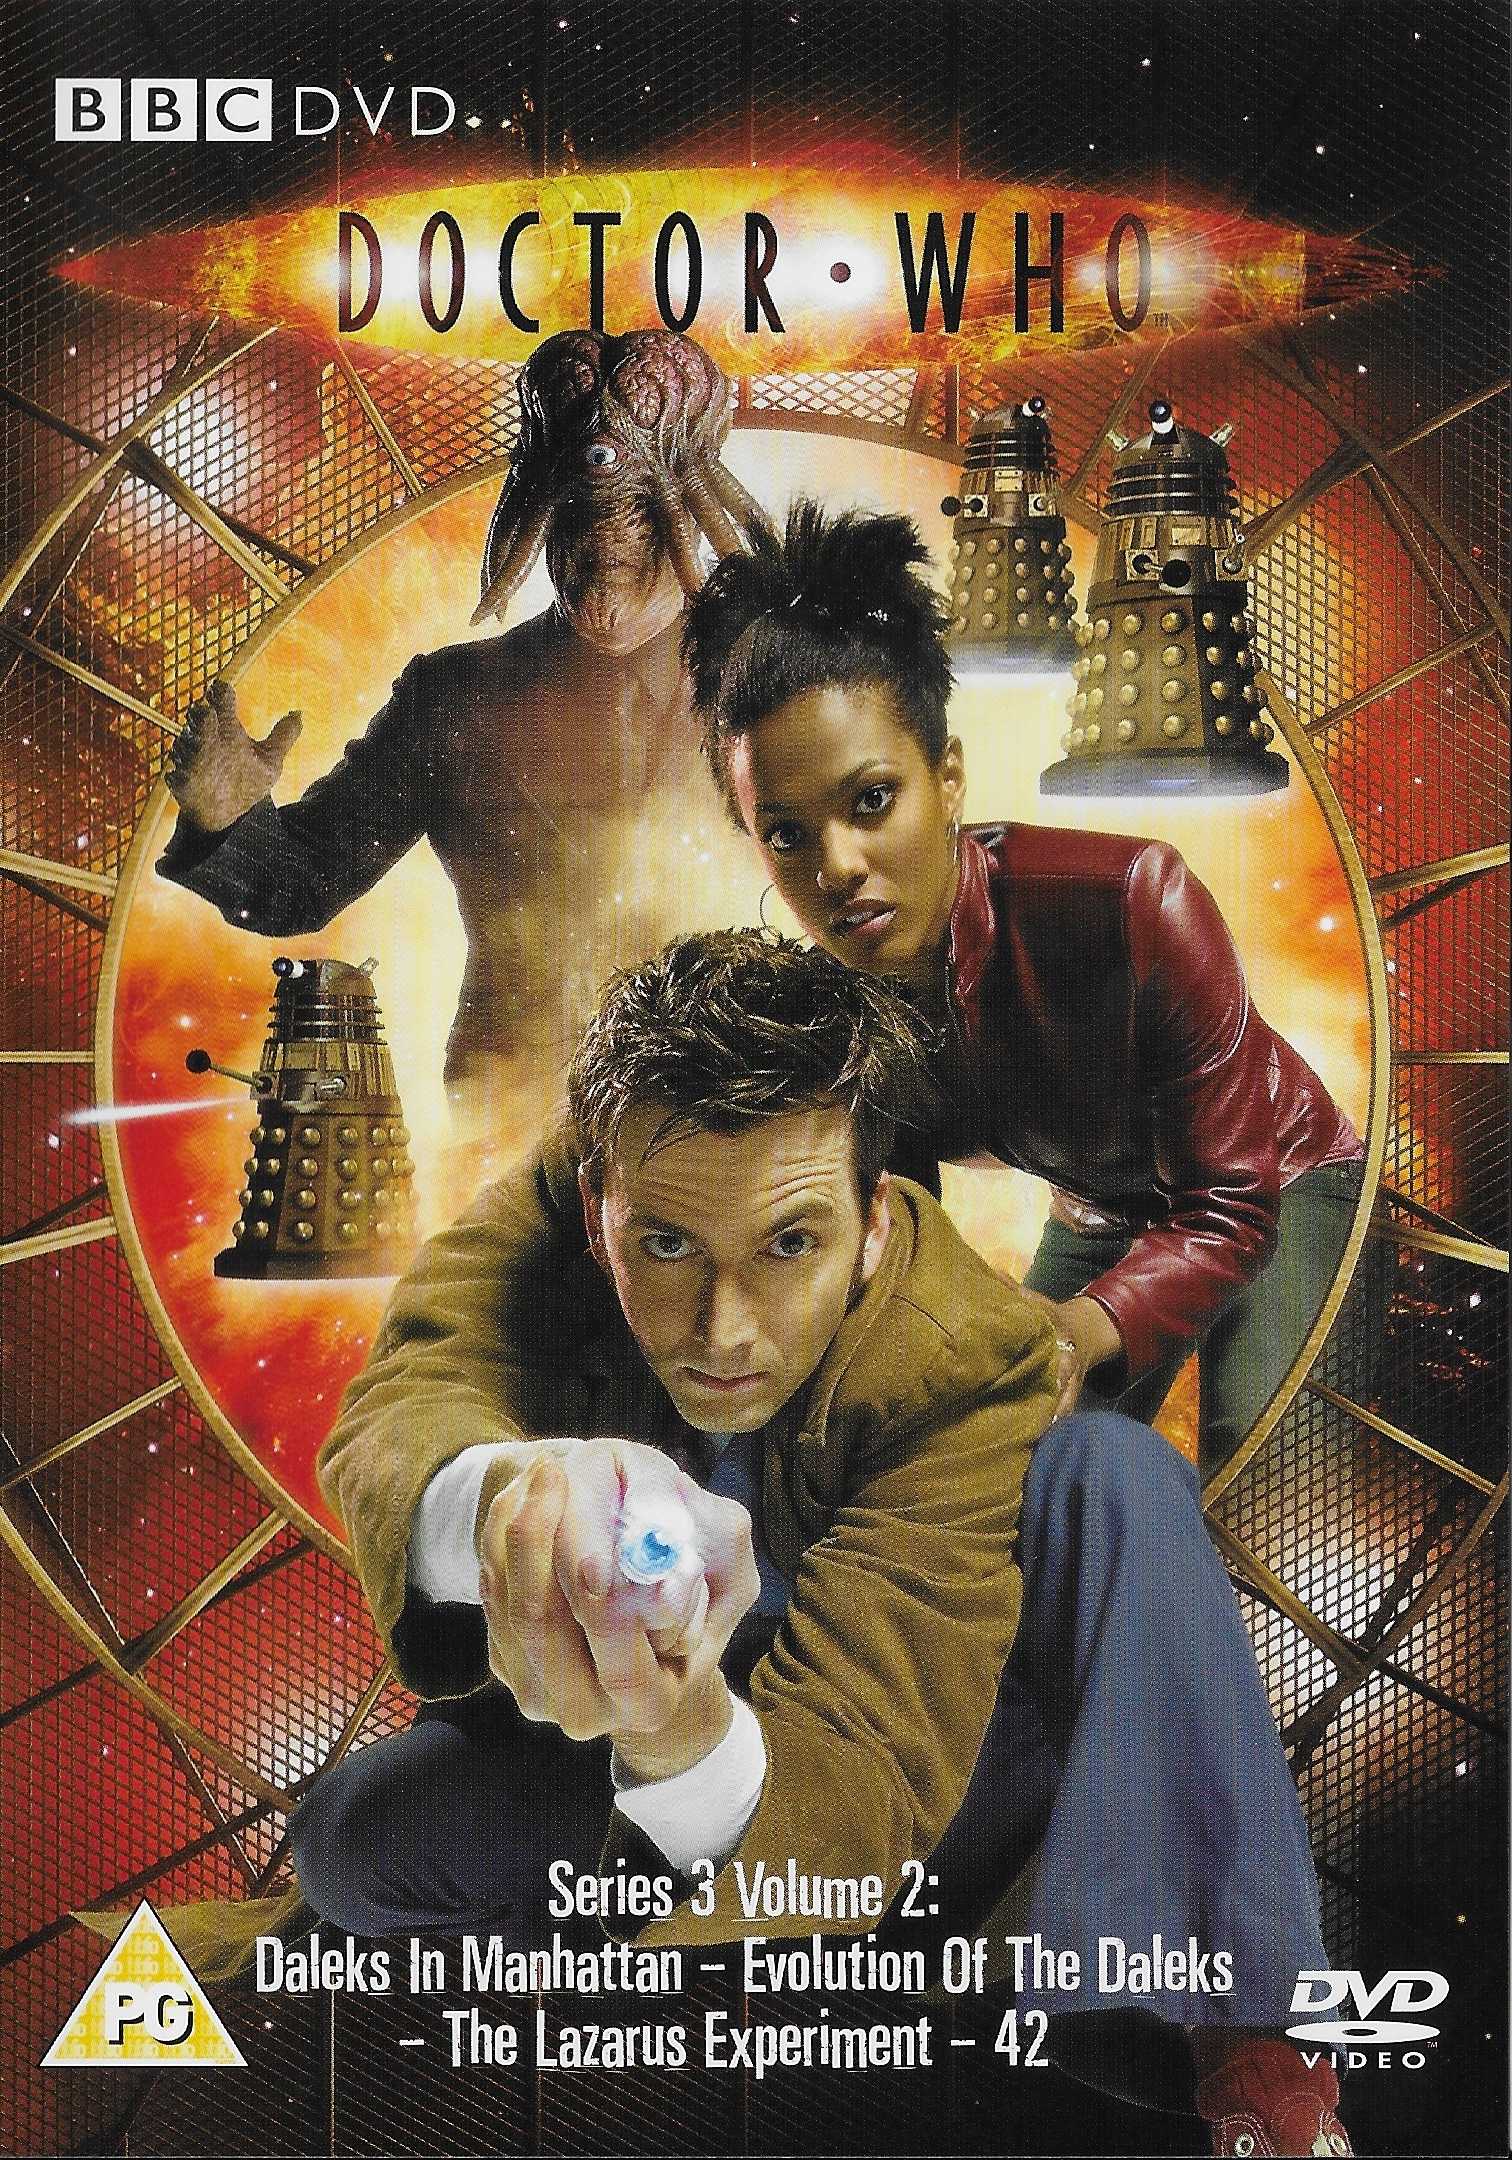 Picture of BBCDVD 2382 Doctor Who - Series 3, volume 2 by artist Helen Raynor / Stephen Greenhorn / Chris Chibnall from the BBC records and Tapes library